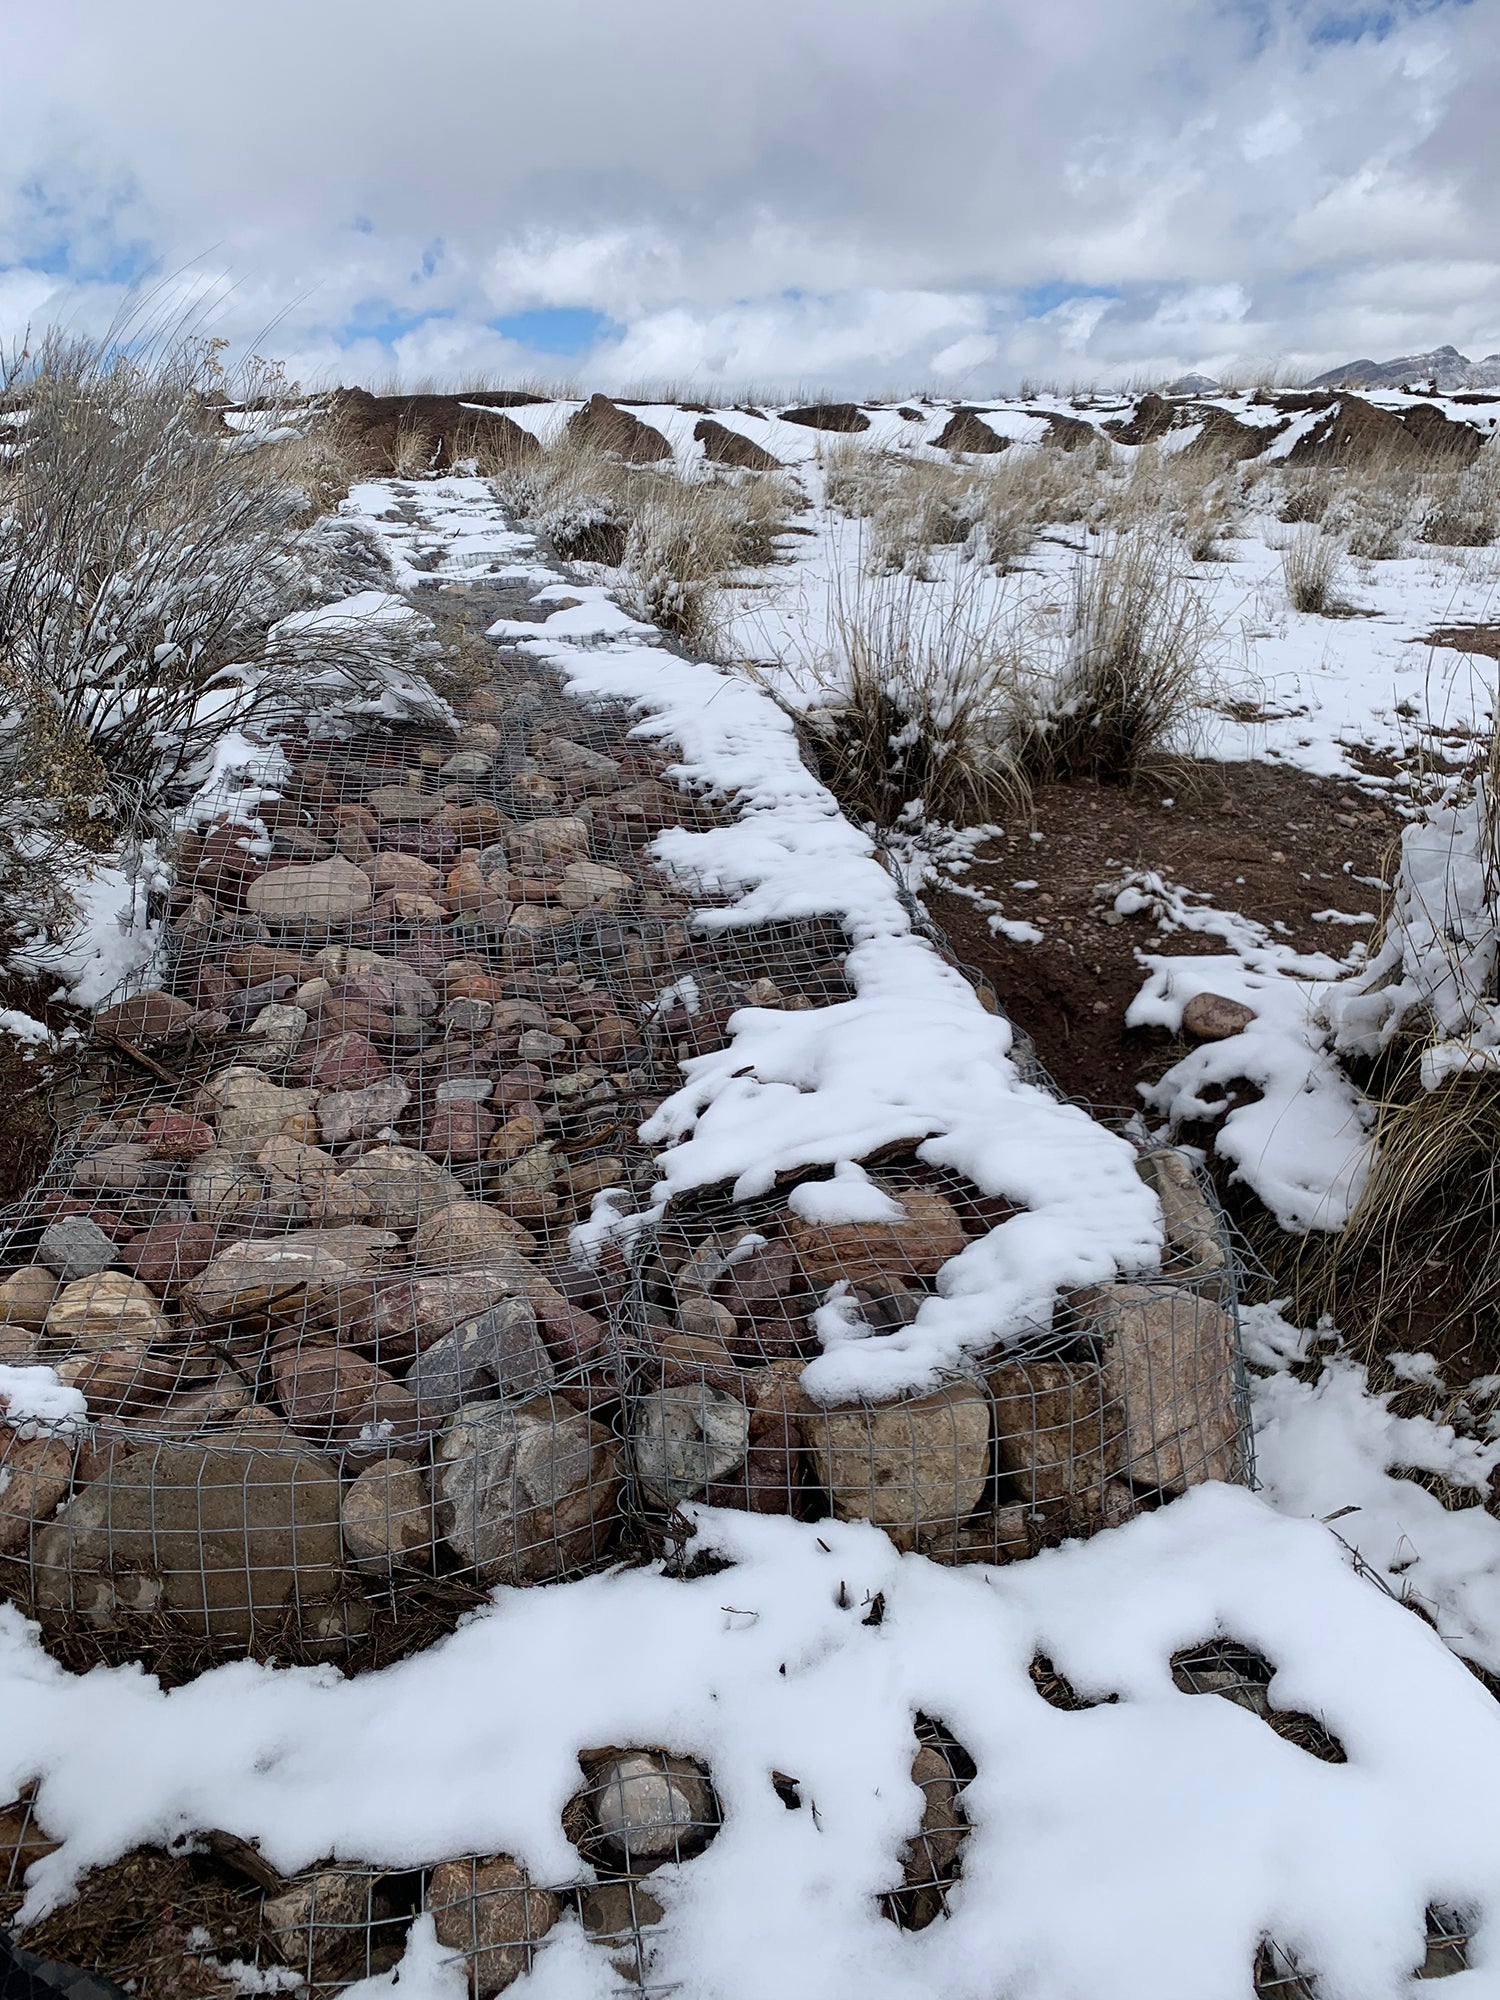 Pile of rocks captured in wire fencing with snow on top. Called gabions, they are built to slow water.